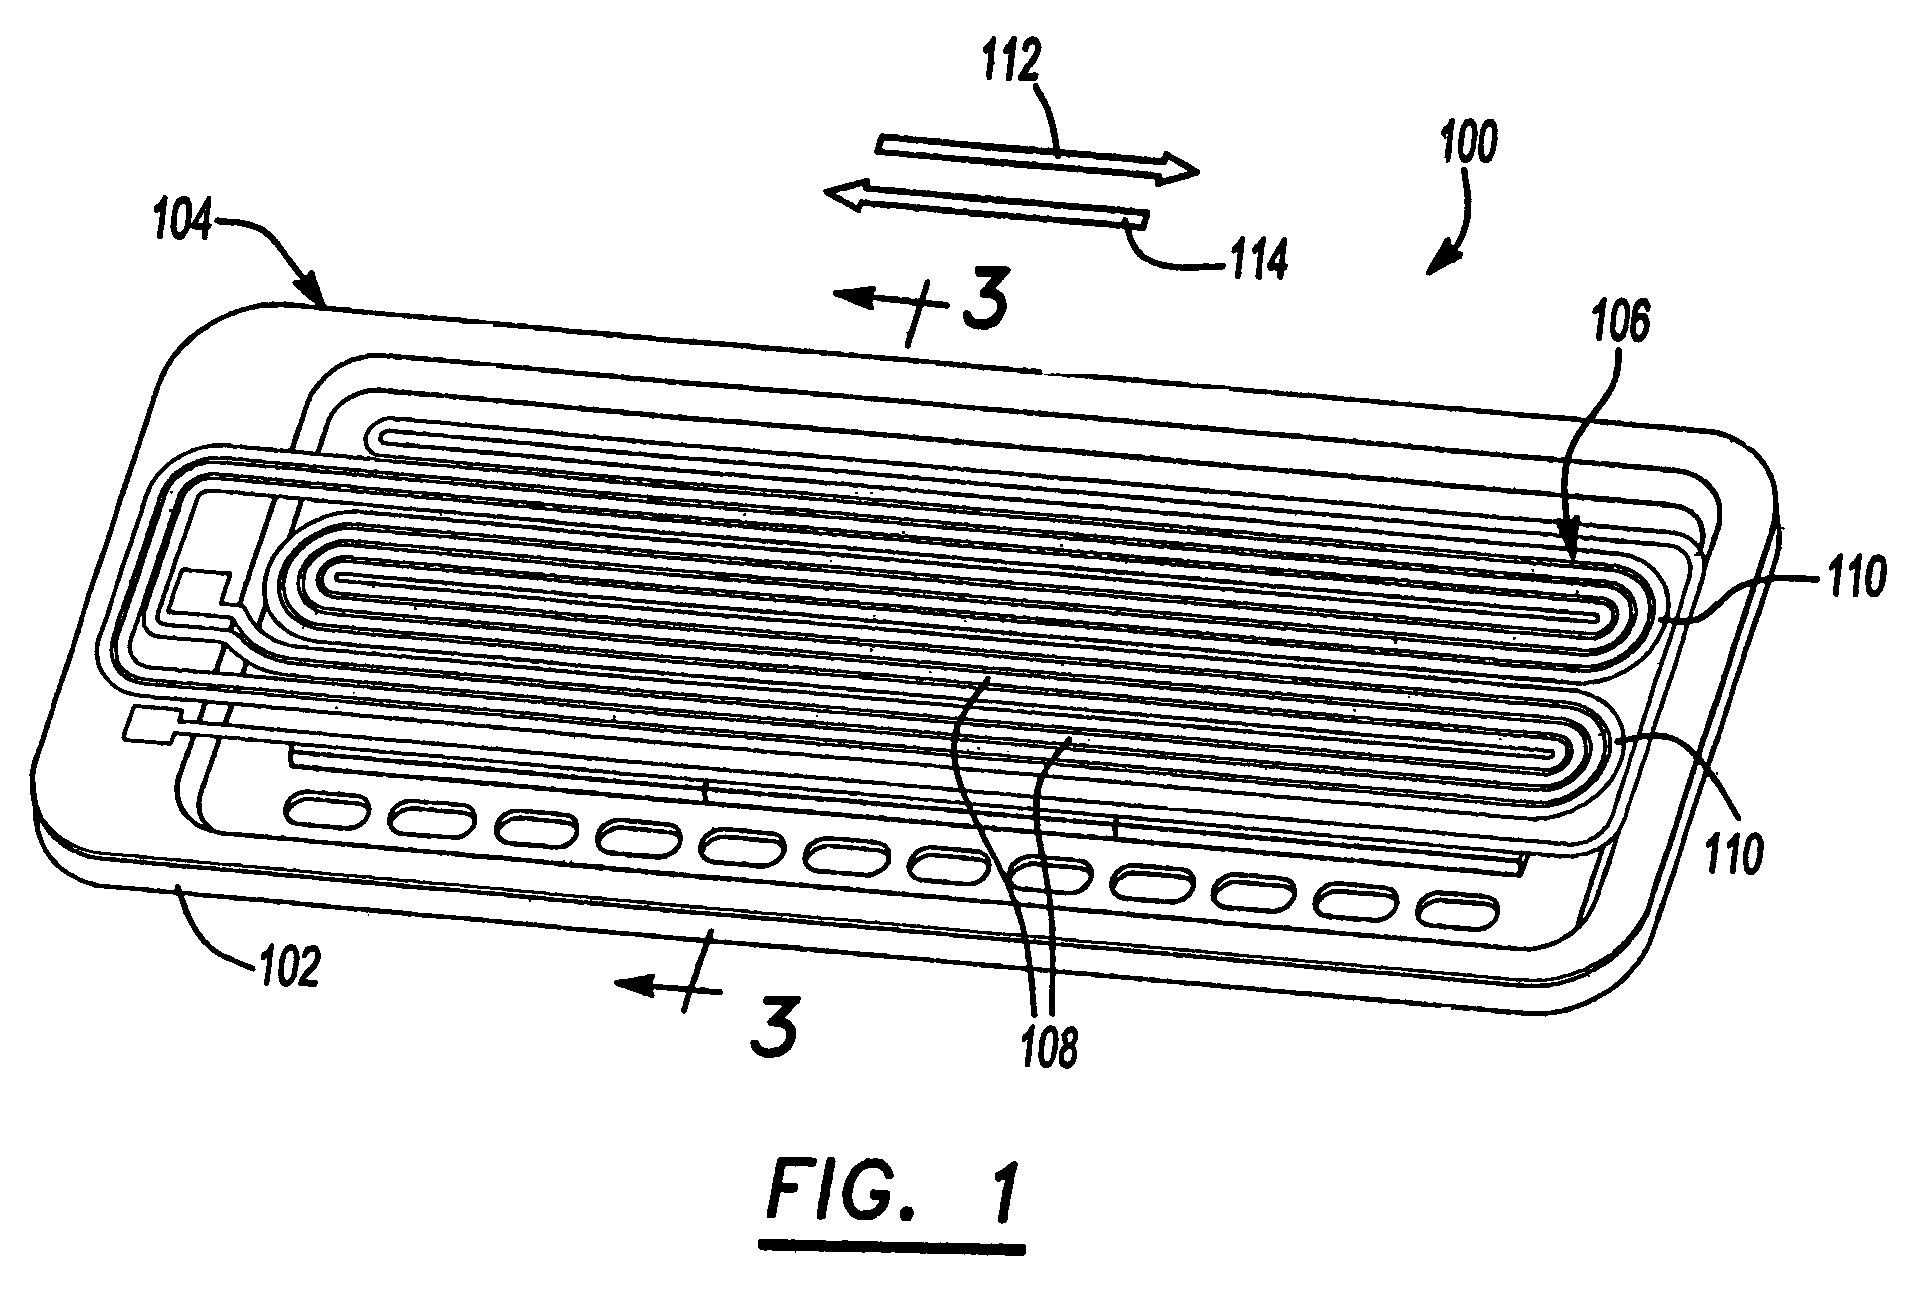 Method of attaching a diaphragm to a frame for a planar loudspeaker